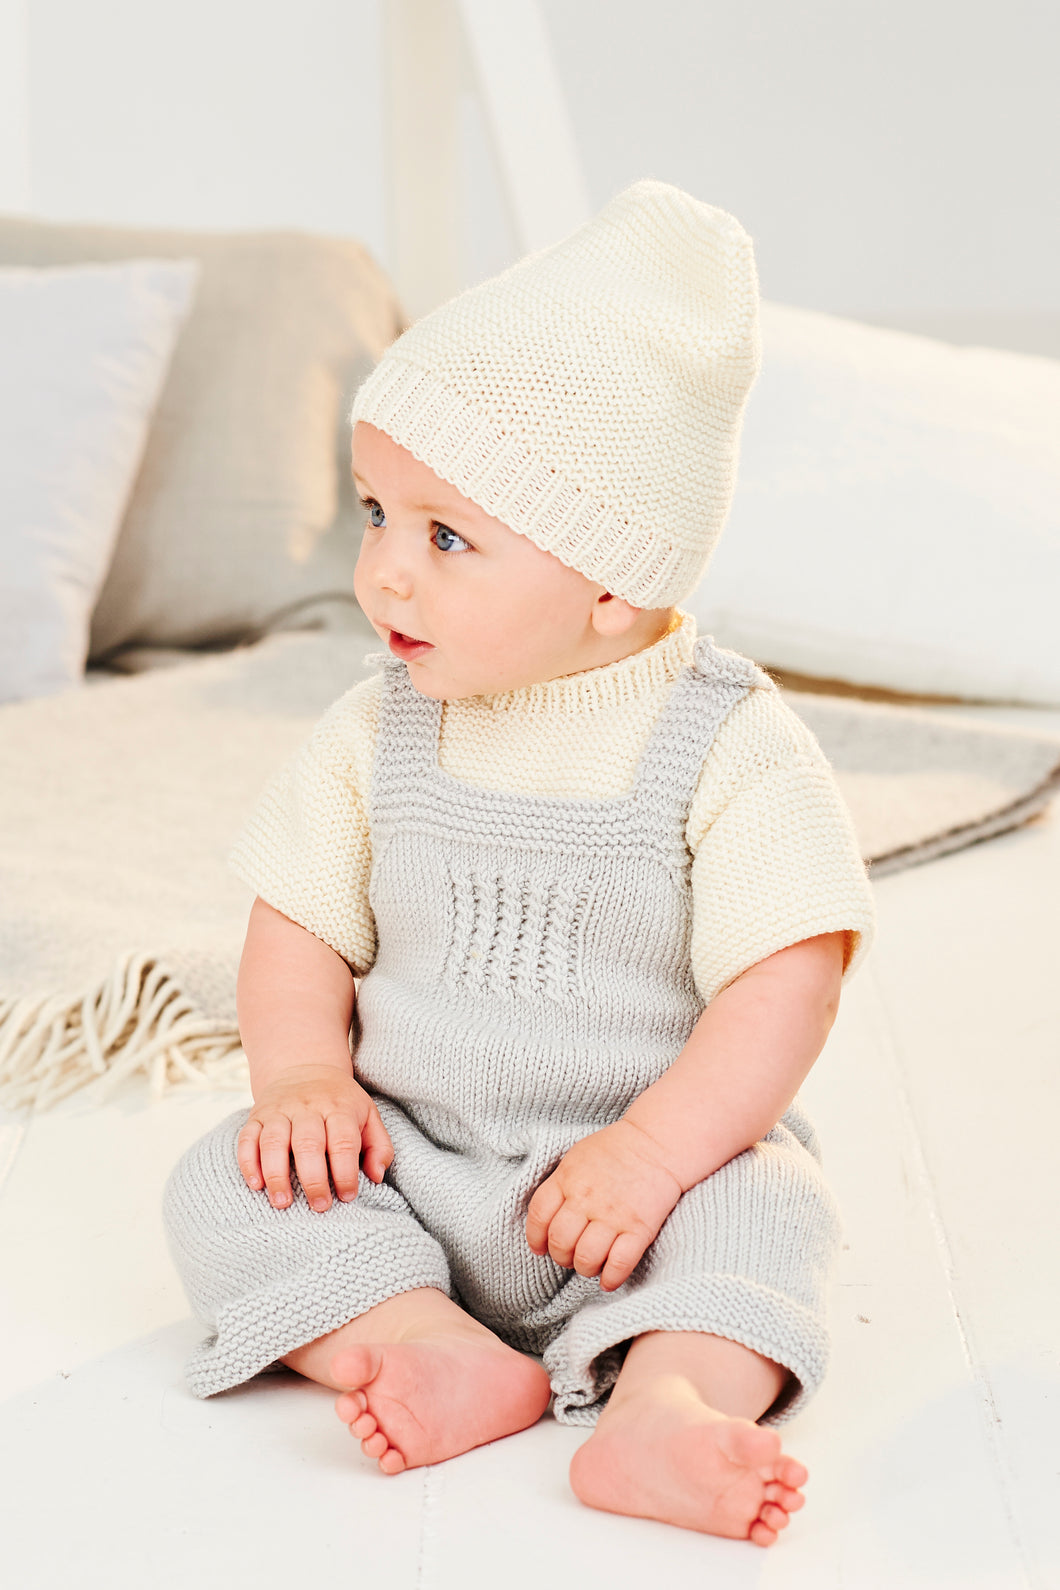 Pattern 9498 - Bambino DK Dungarees, Top and Hat